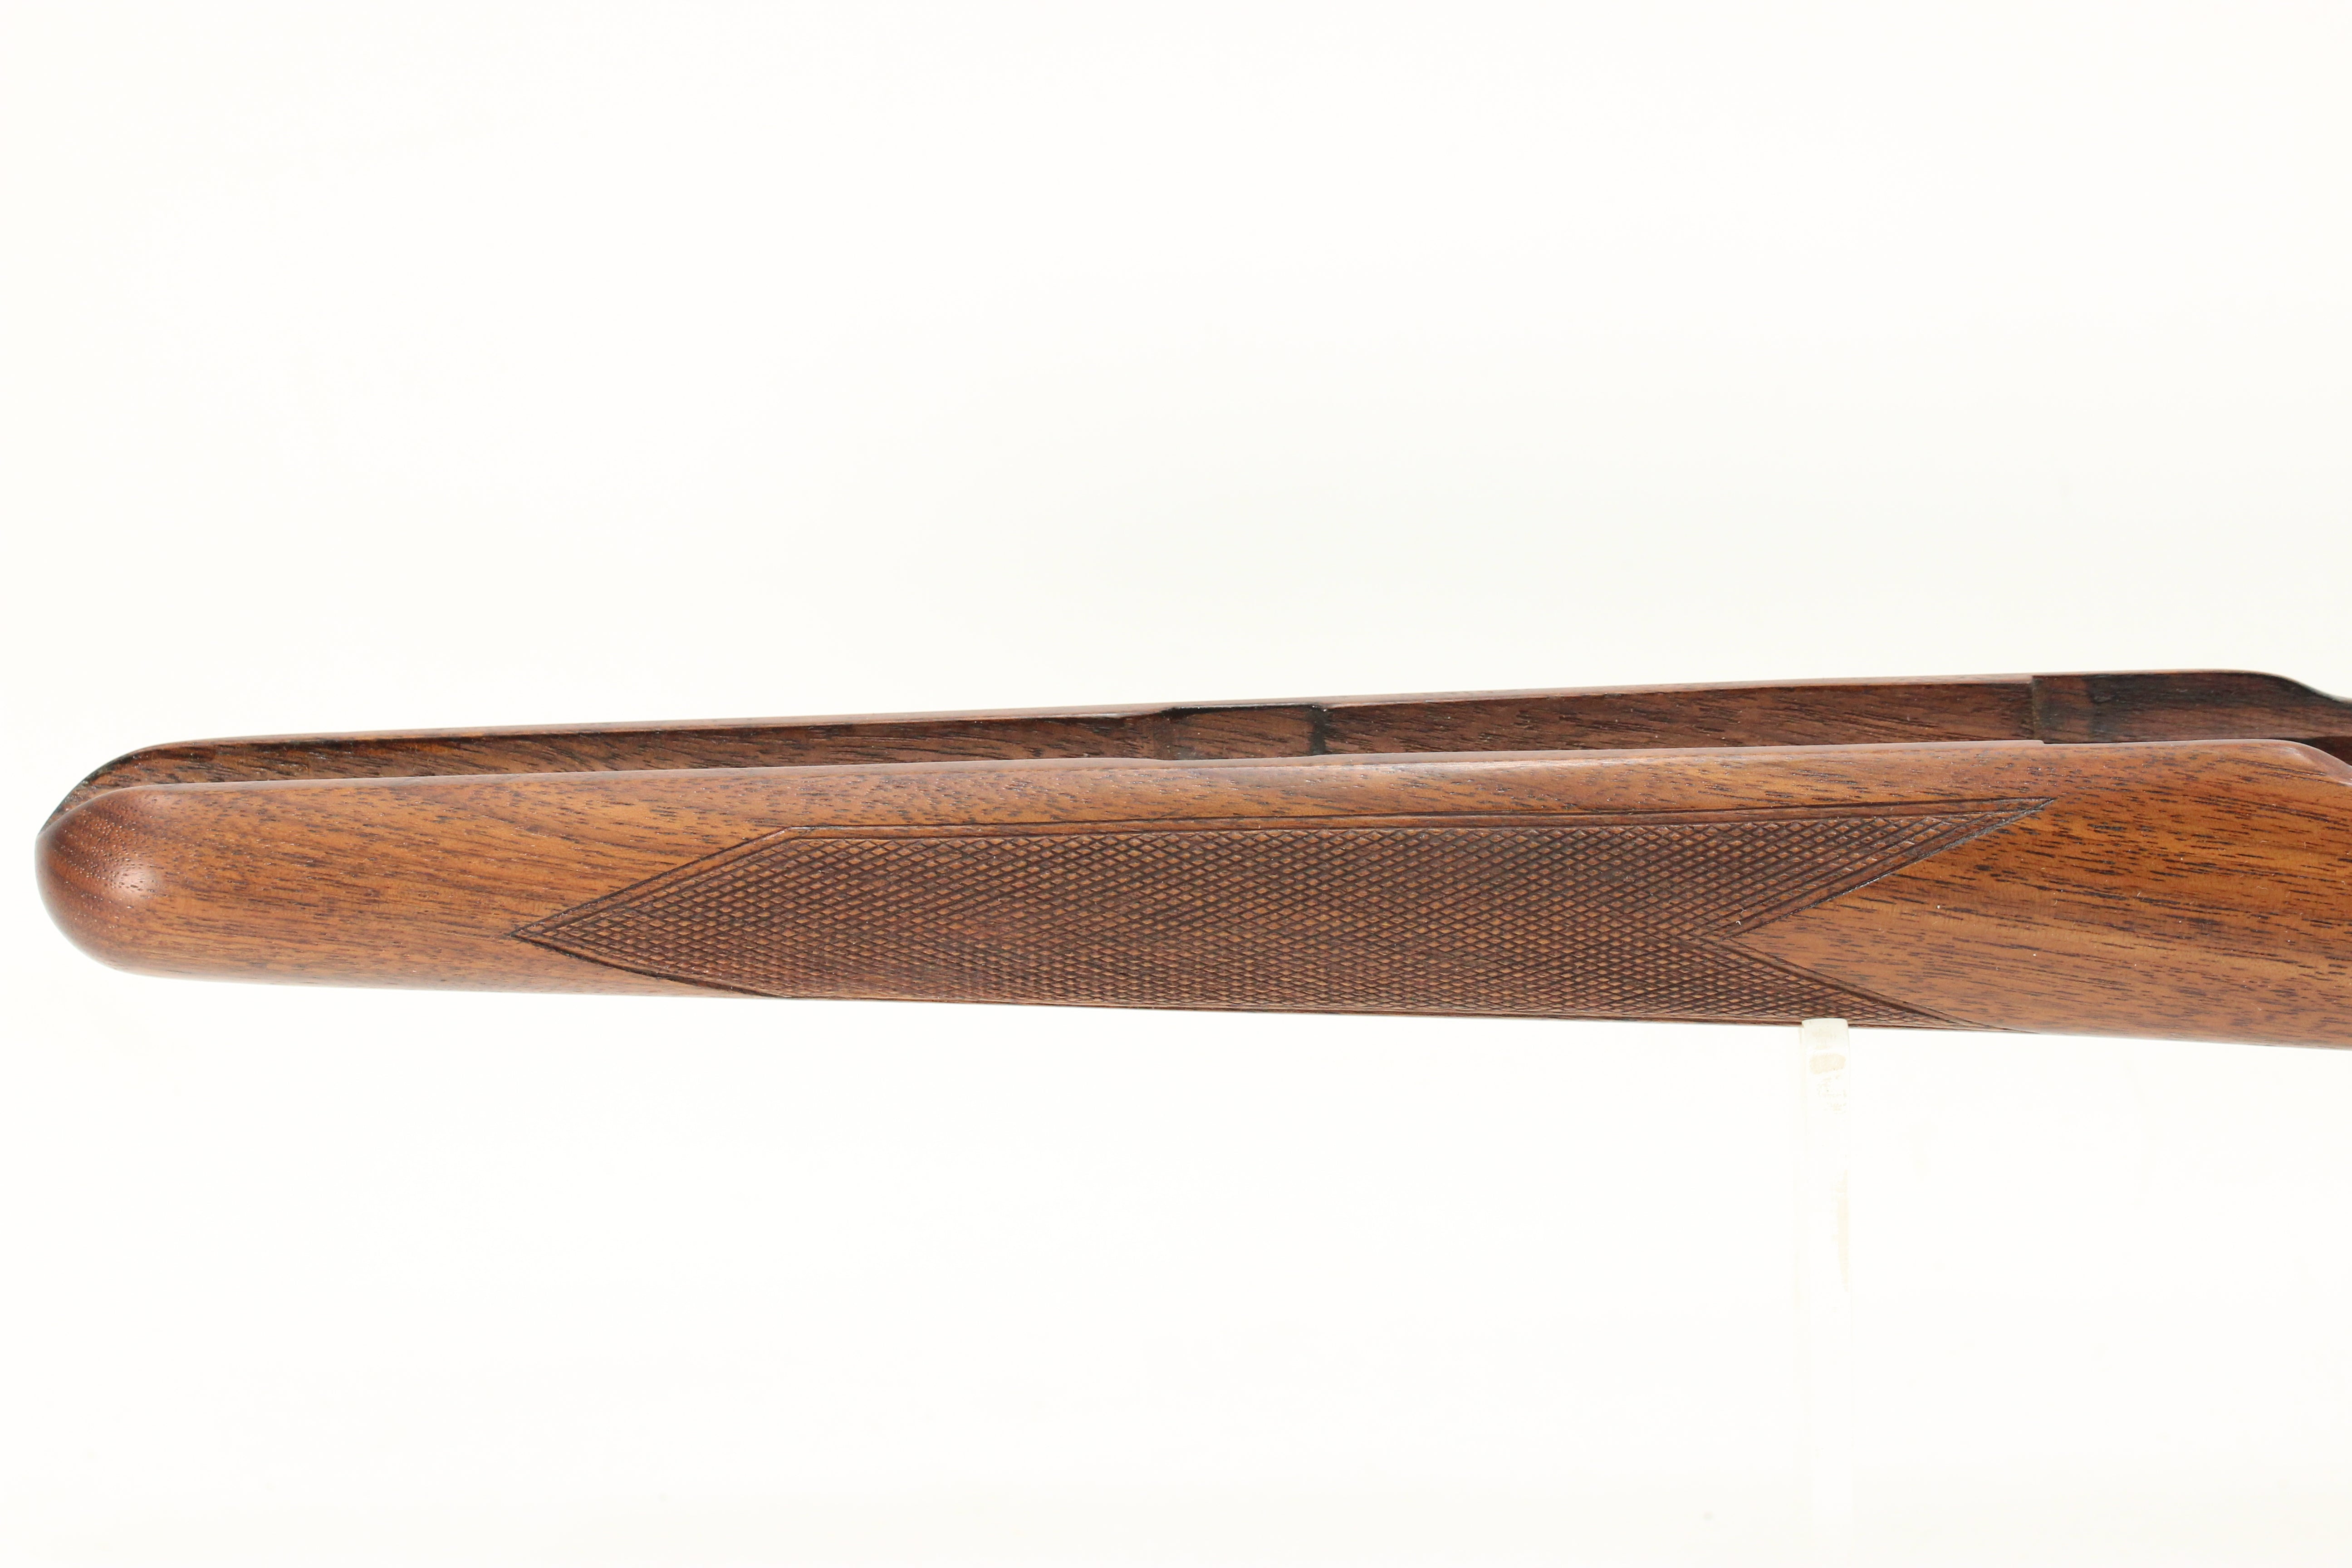 1941-1948 Low Comb Standard Rifle Stock - Shortened